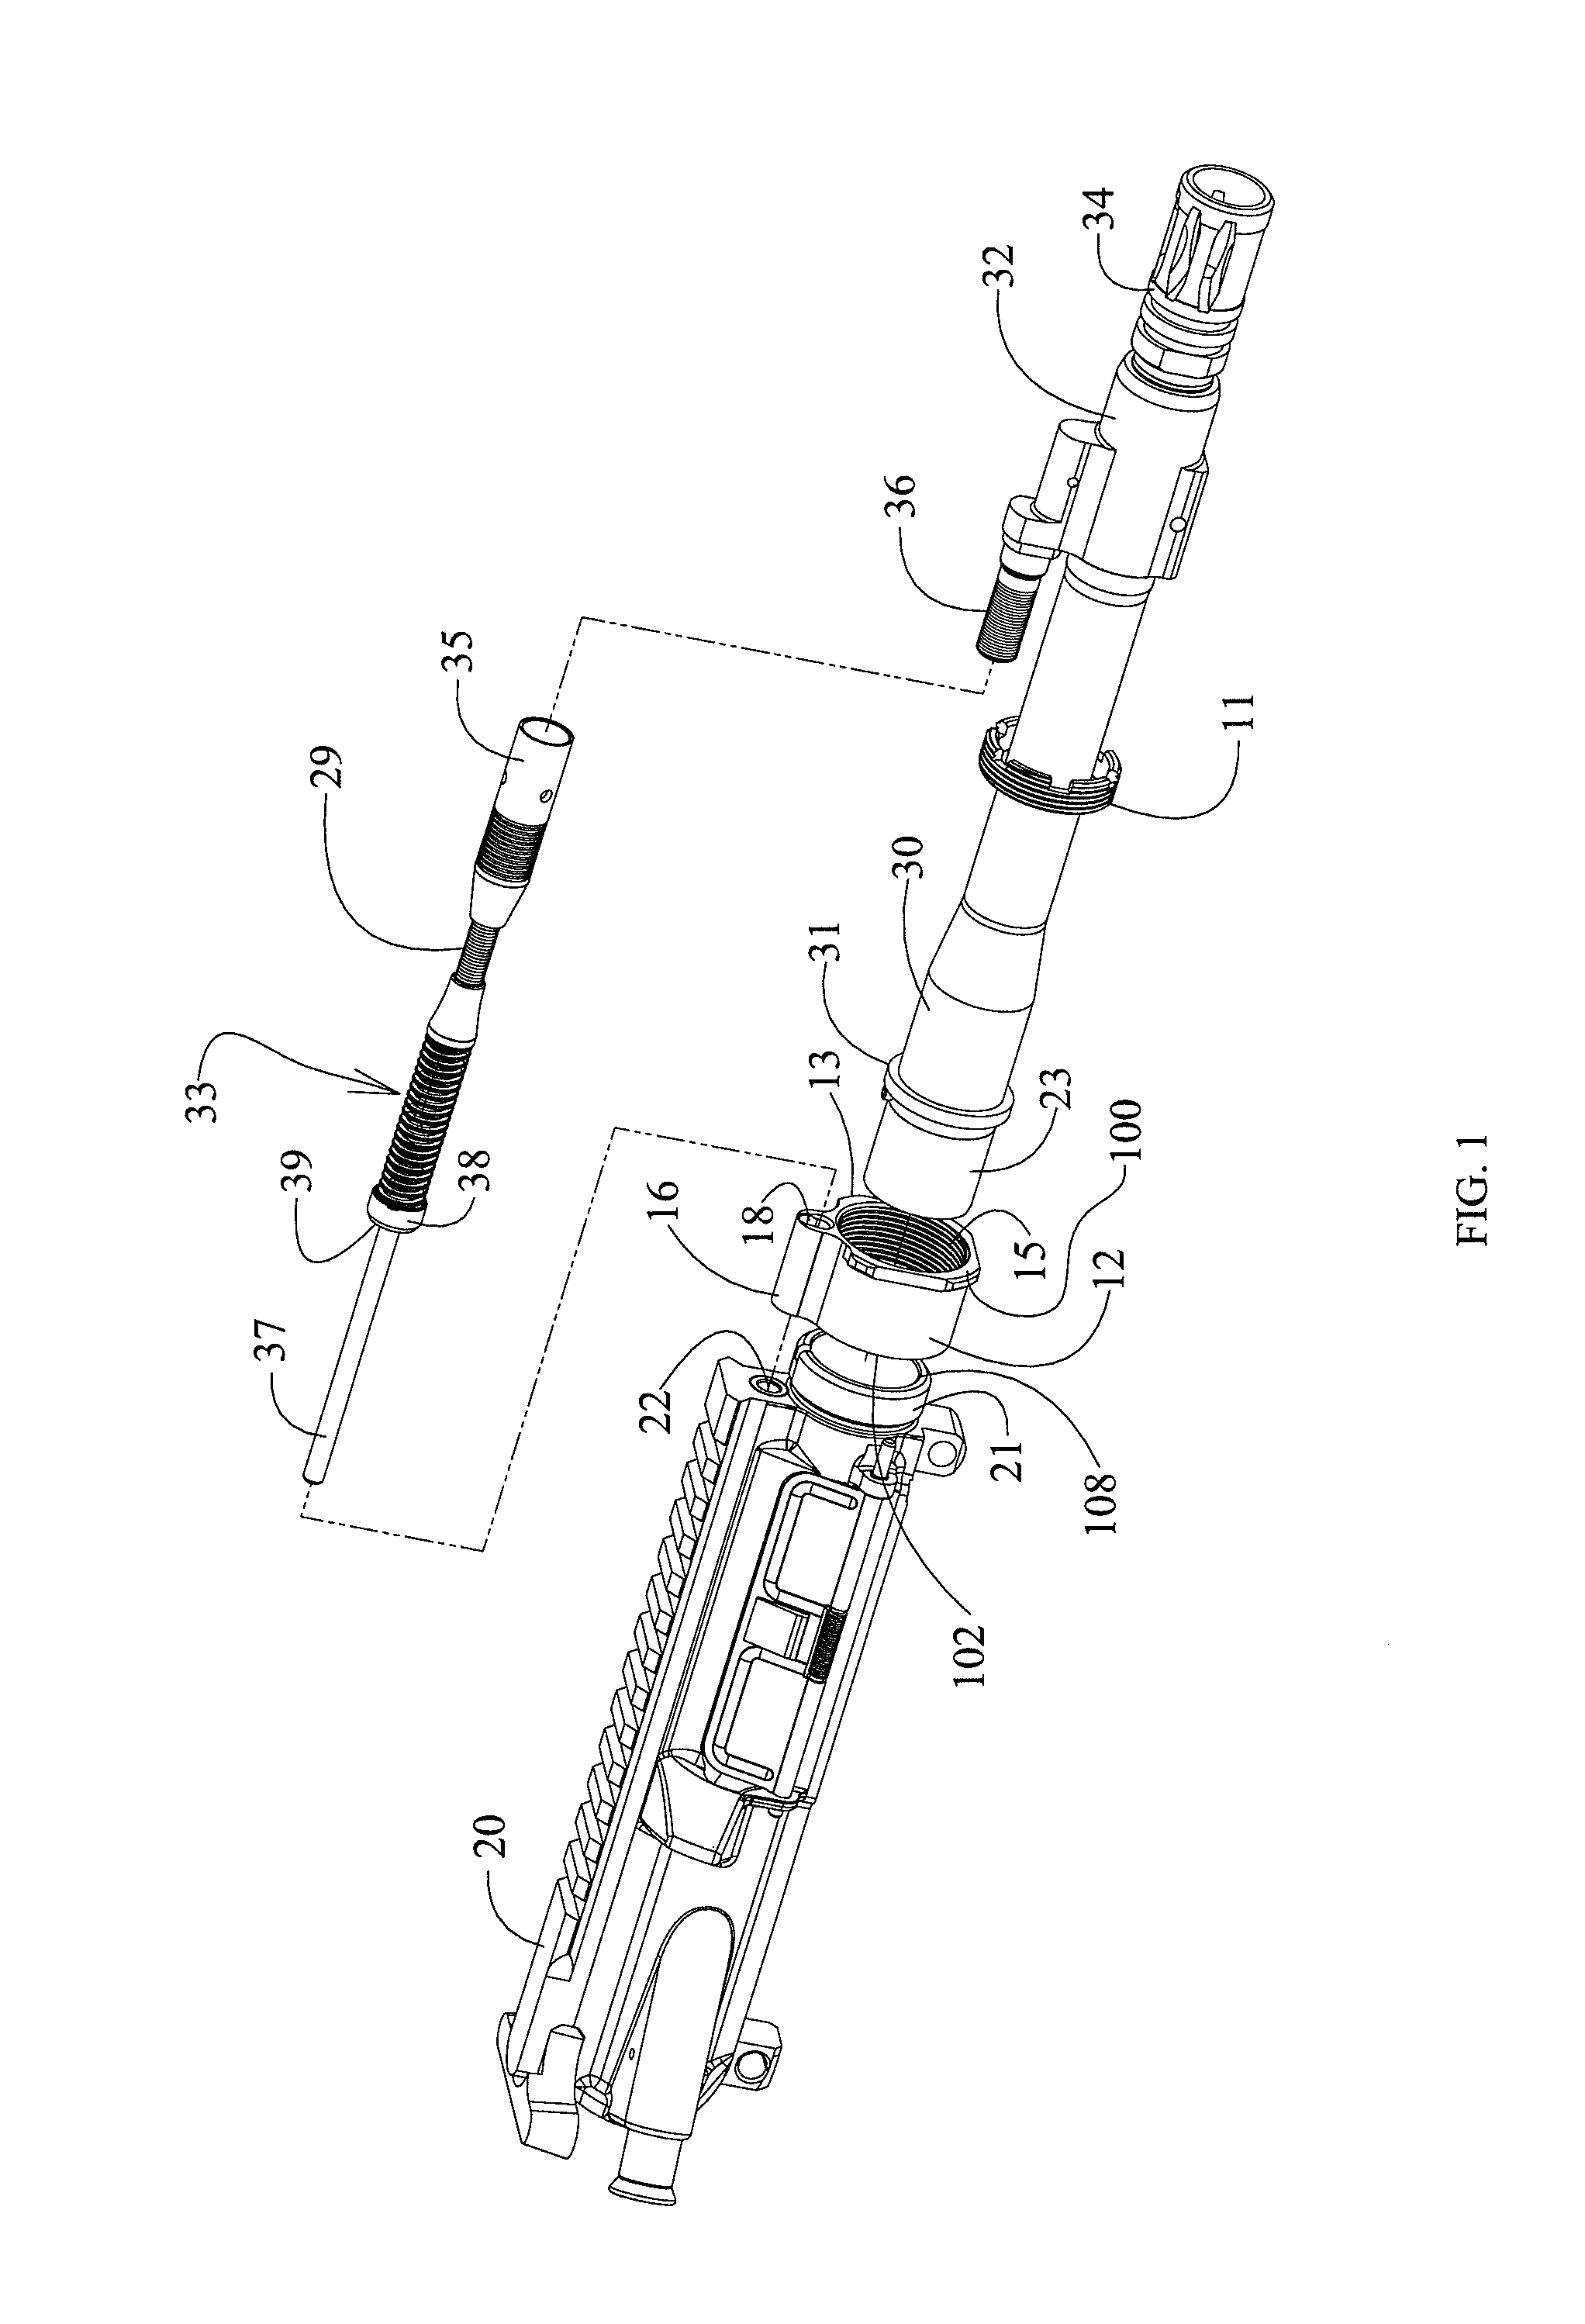 Barrel nut assembly and method to attach a barrel to a firearm using such assembly